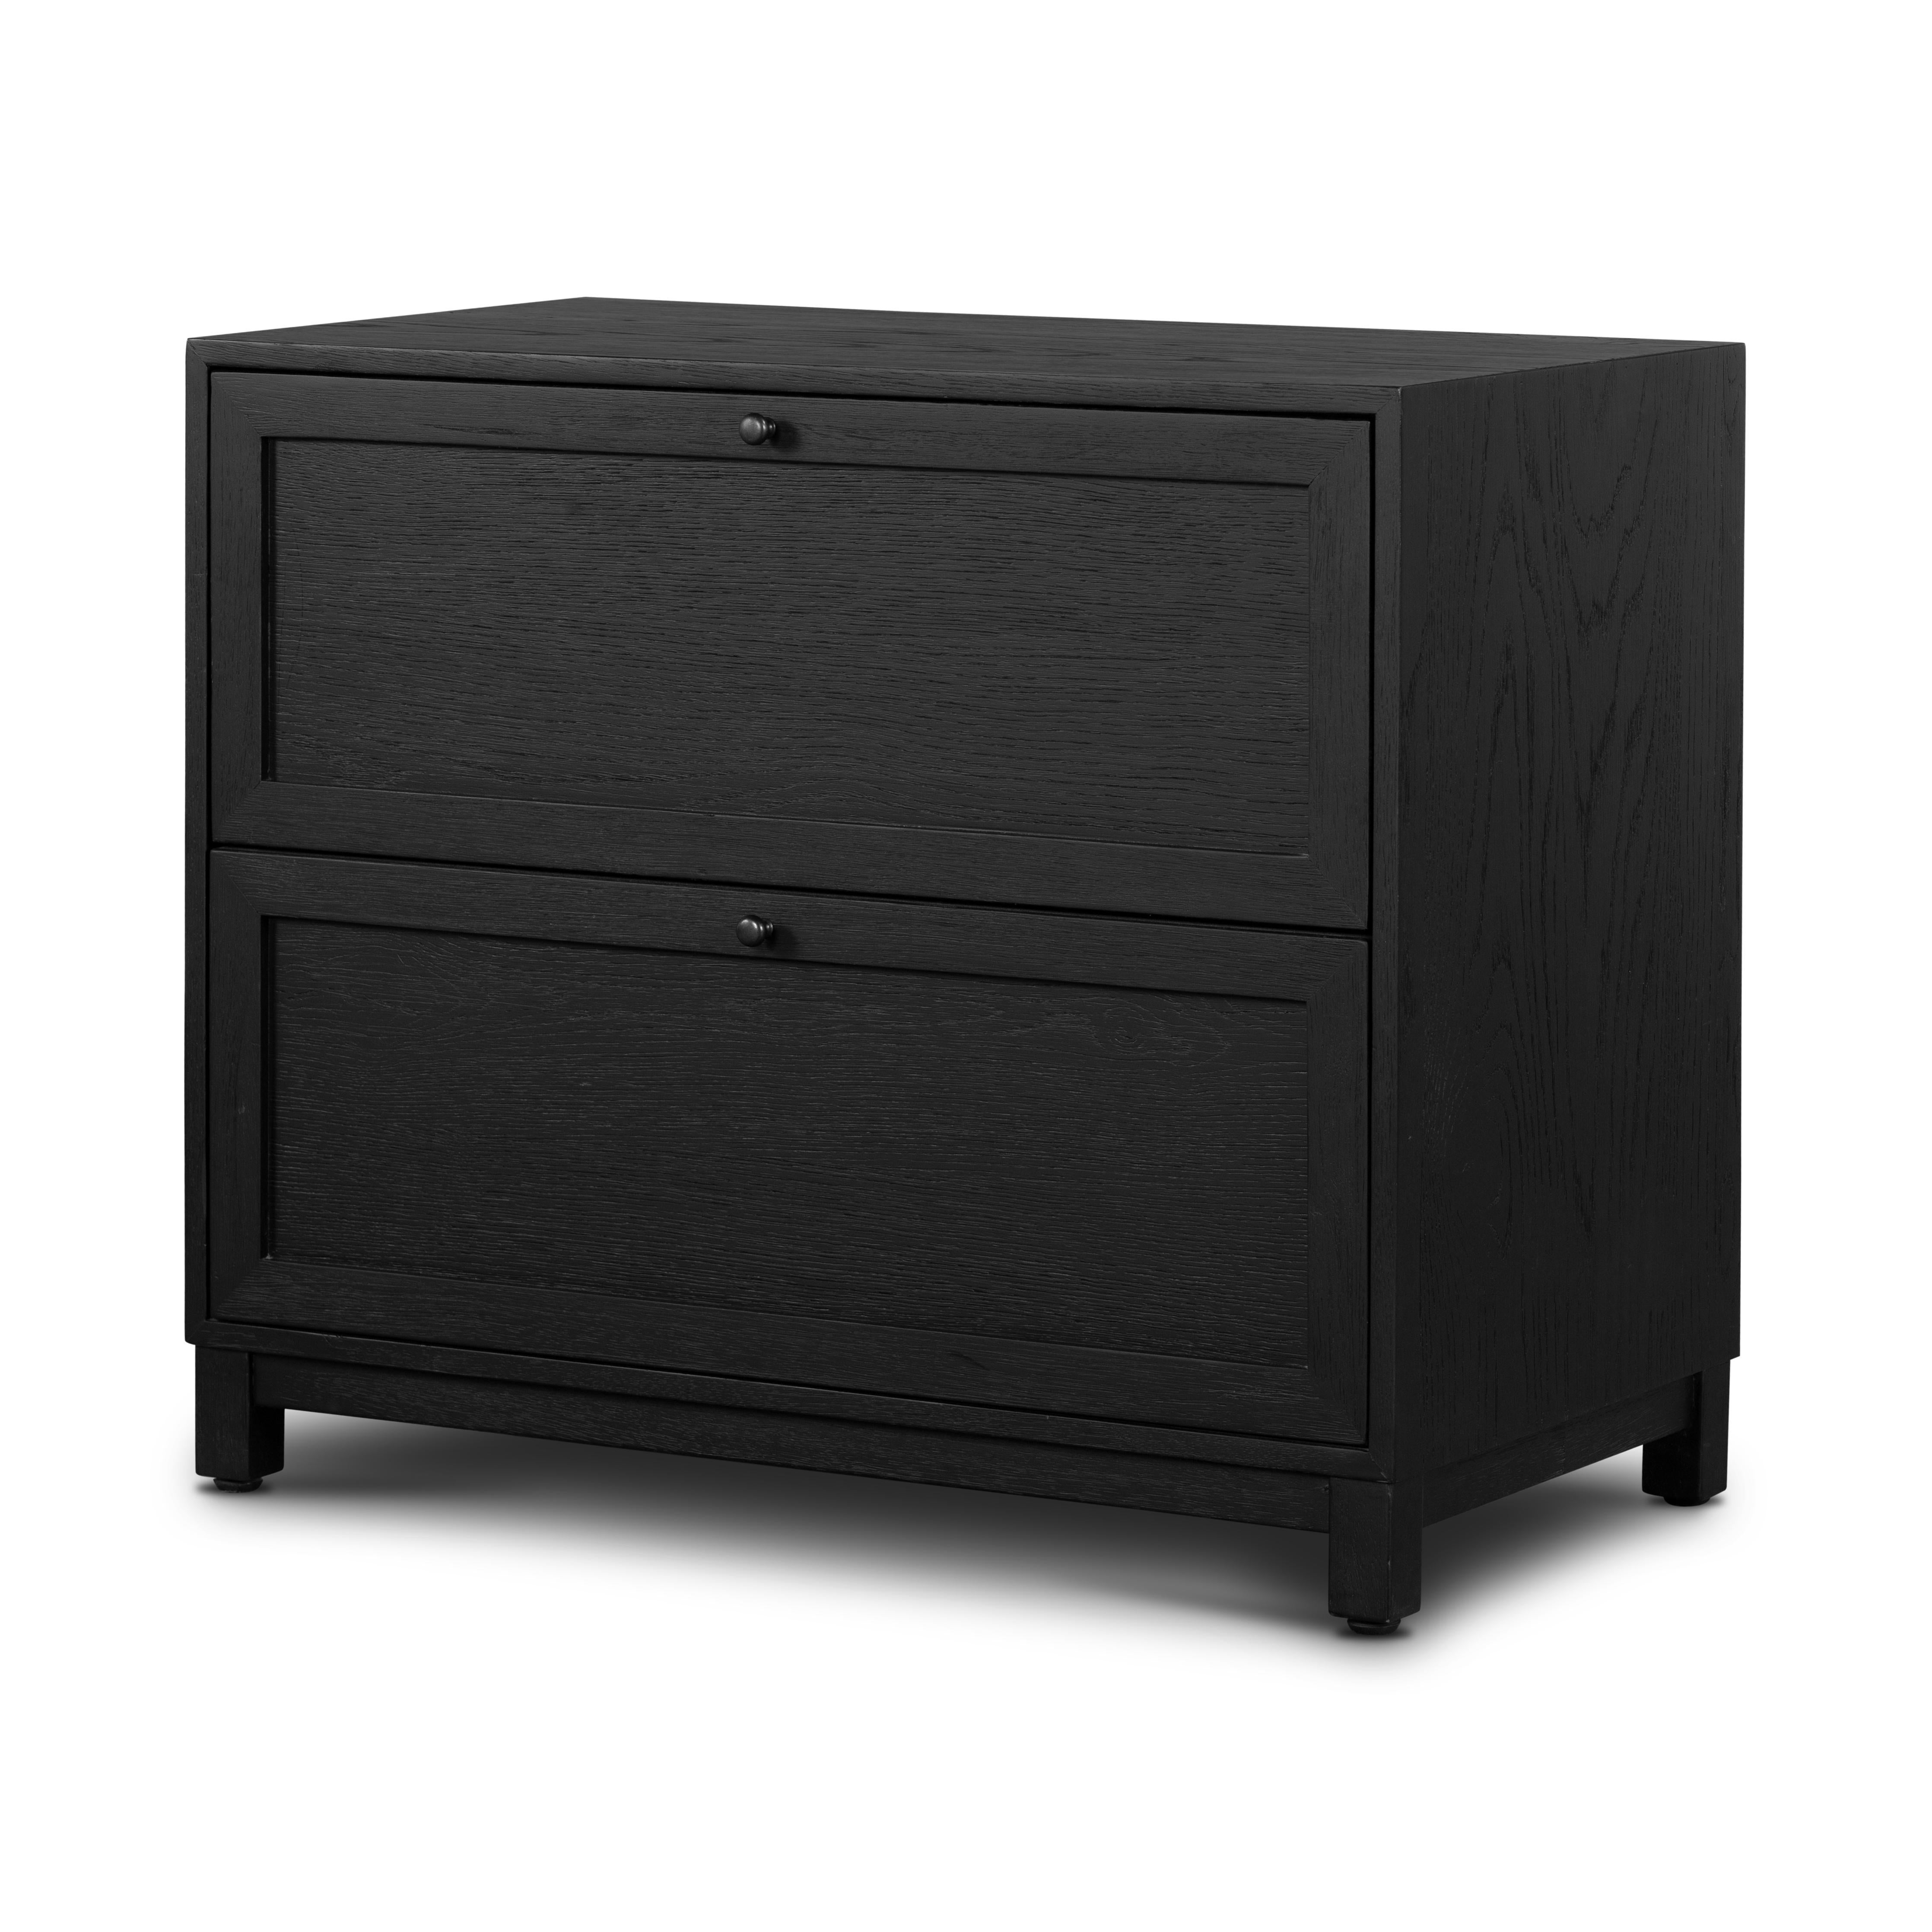 The Millie Drifted Matte Black Nightstand is perfect for adding a touch of modern charm to your home. With its drifted matte black veneer, solid parawood and iron accents, this nightstand brings a sophisticated style to any bedroom. Plus, the antique pewter and drifted oak colors make it easy to match with existing decor. Amethyst Home provides interior design, new home construction design consulting, vintage area rugs, and lighting in the Dallas metro area.